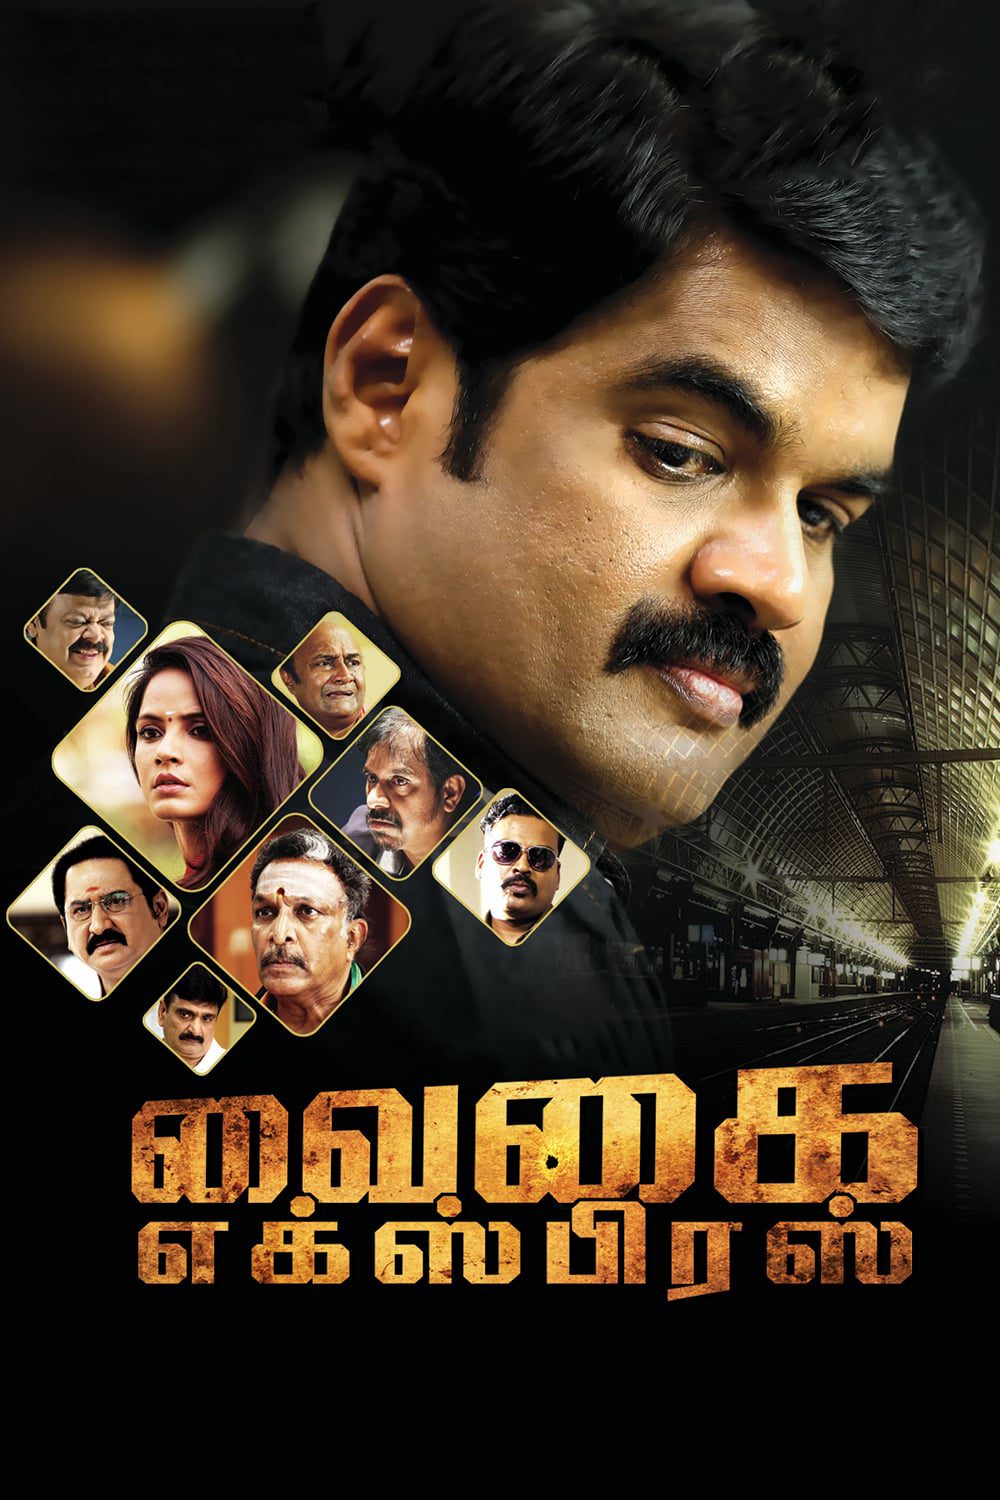 Poster for the movie "Vaigai Express"